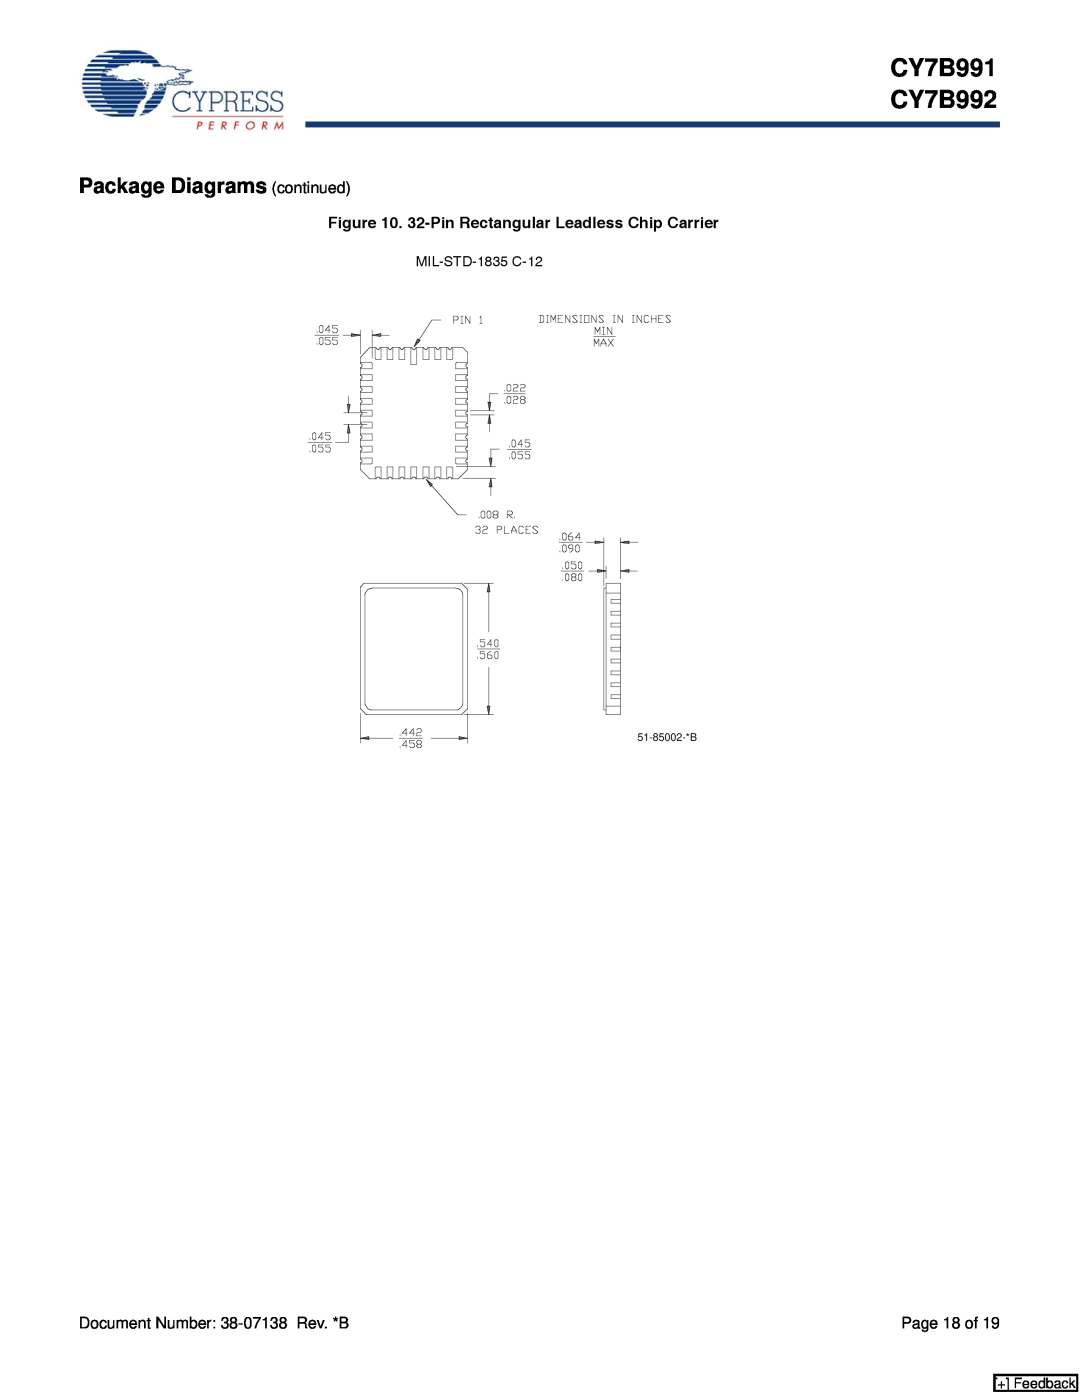 Cypress manual Package Diagrams continued, 32-Pin Rectangular Leadless Chip Carrier, CY7B991 CY7B992, + Feedback 